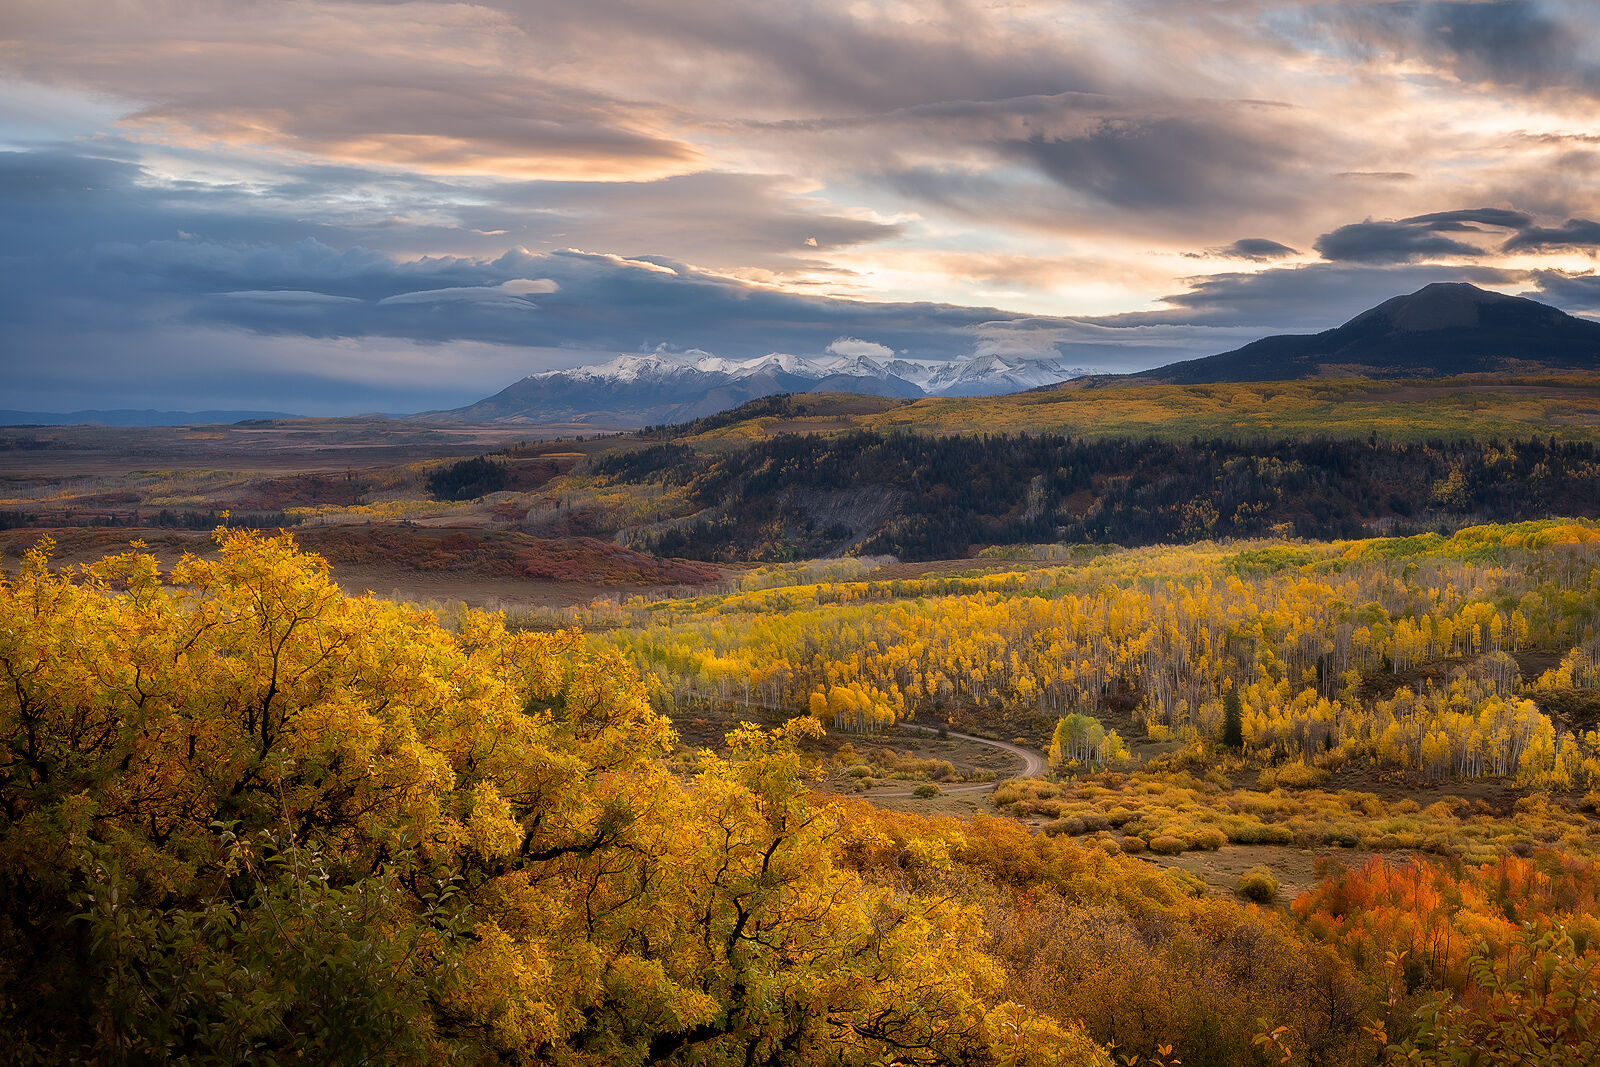 Fall colors flood the scene with orange and yellow and red with a snow covered mountain range in the distance.